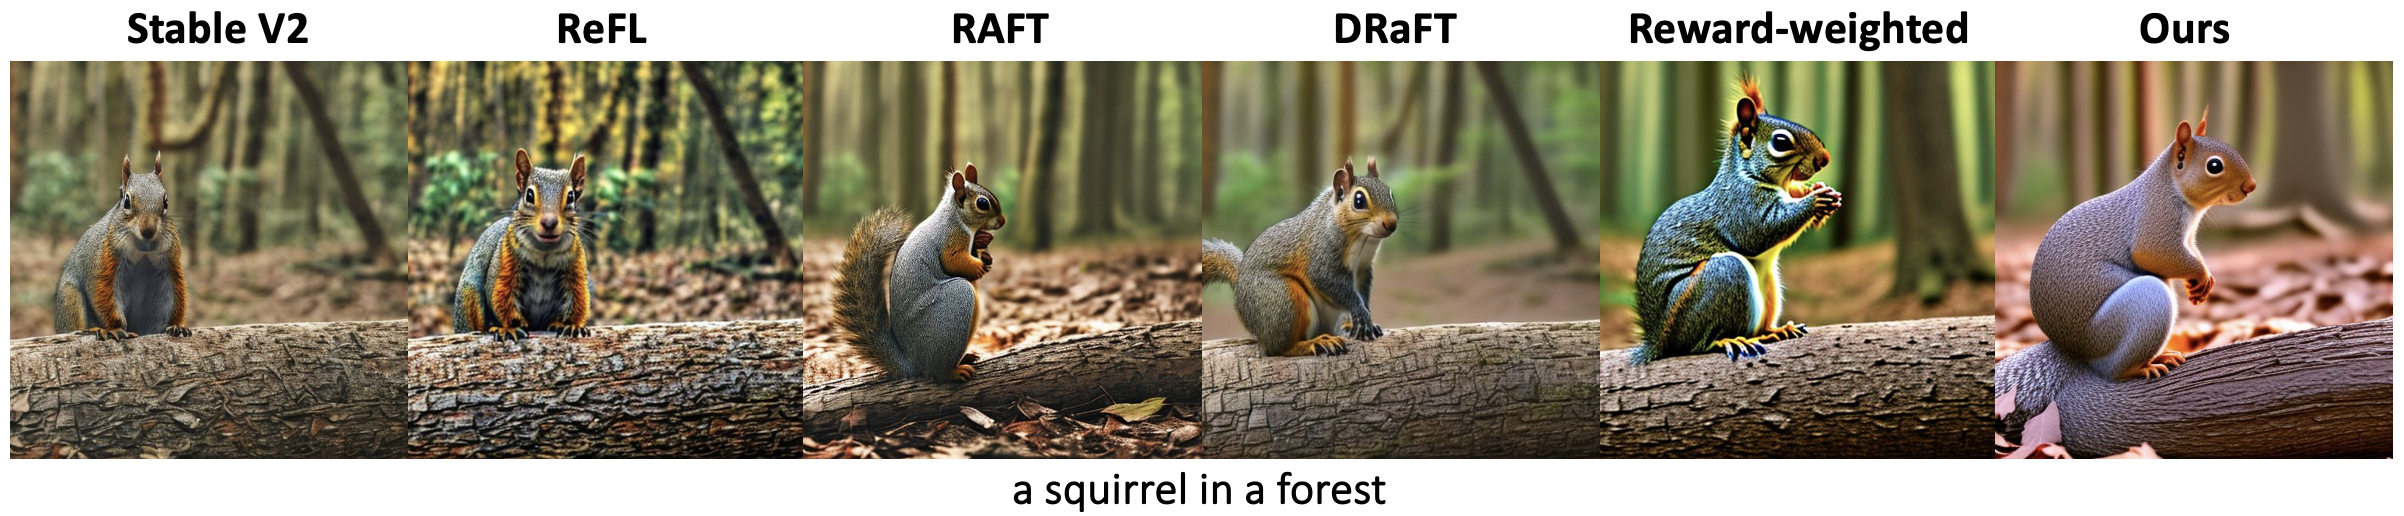 A squirrel in a forest